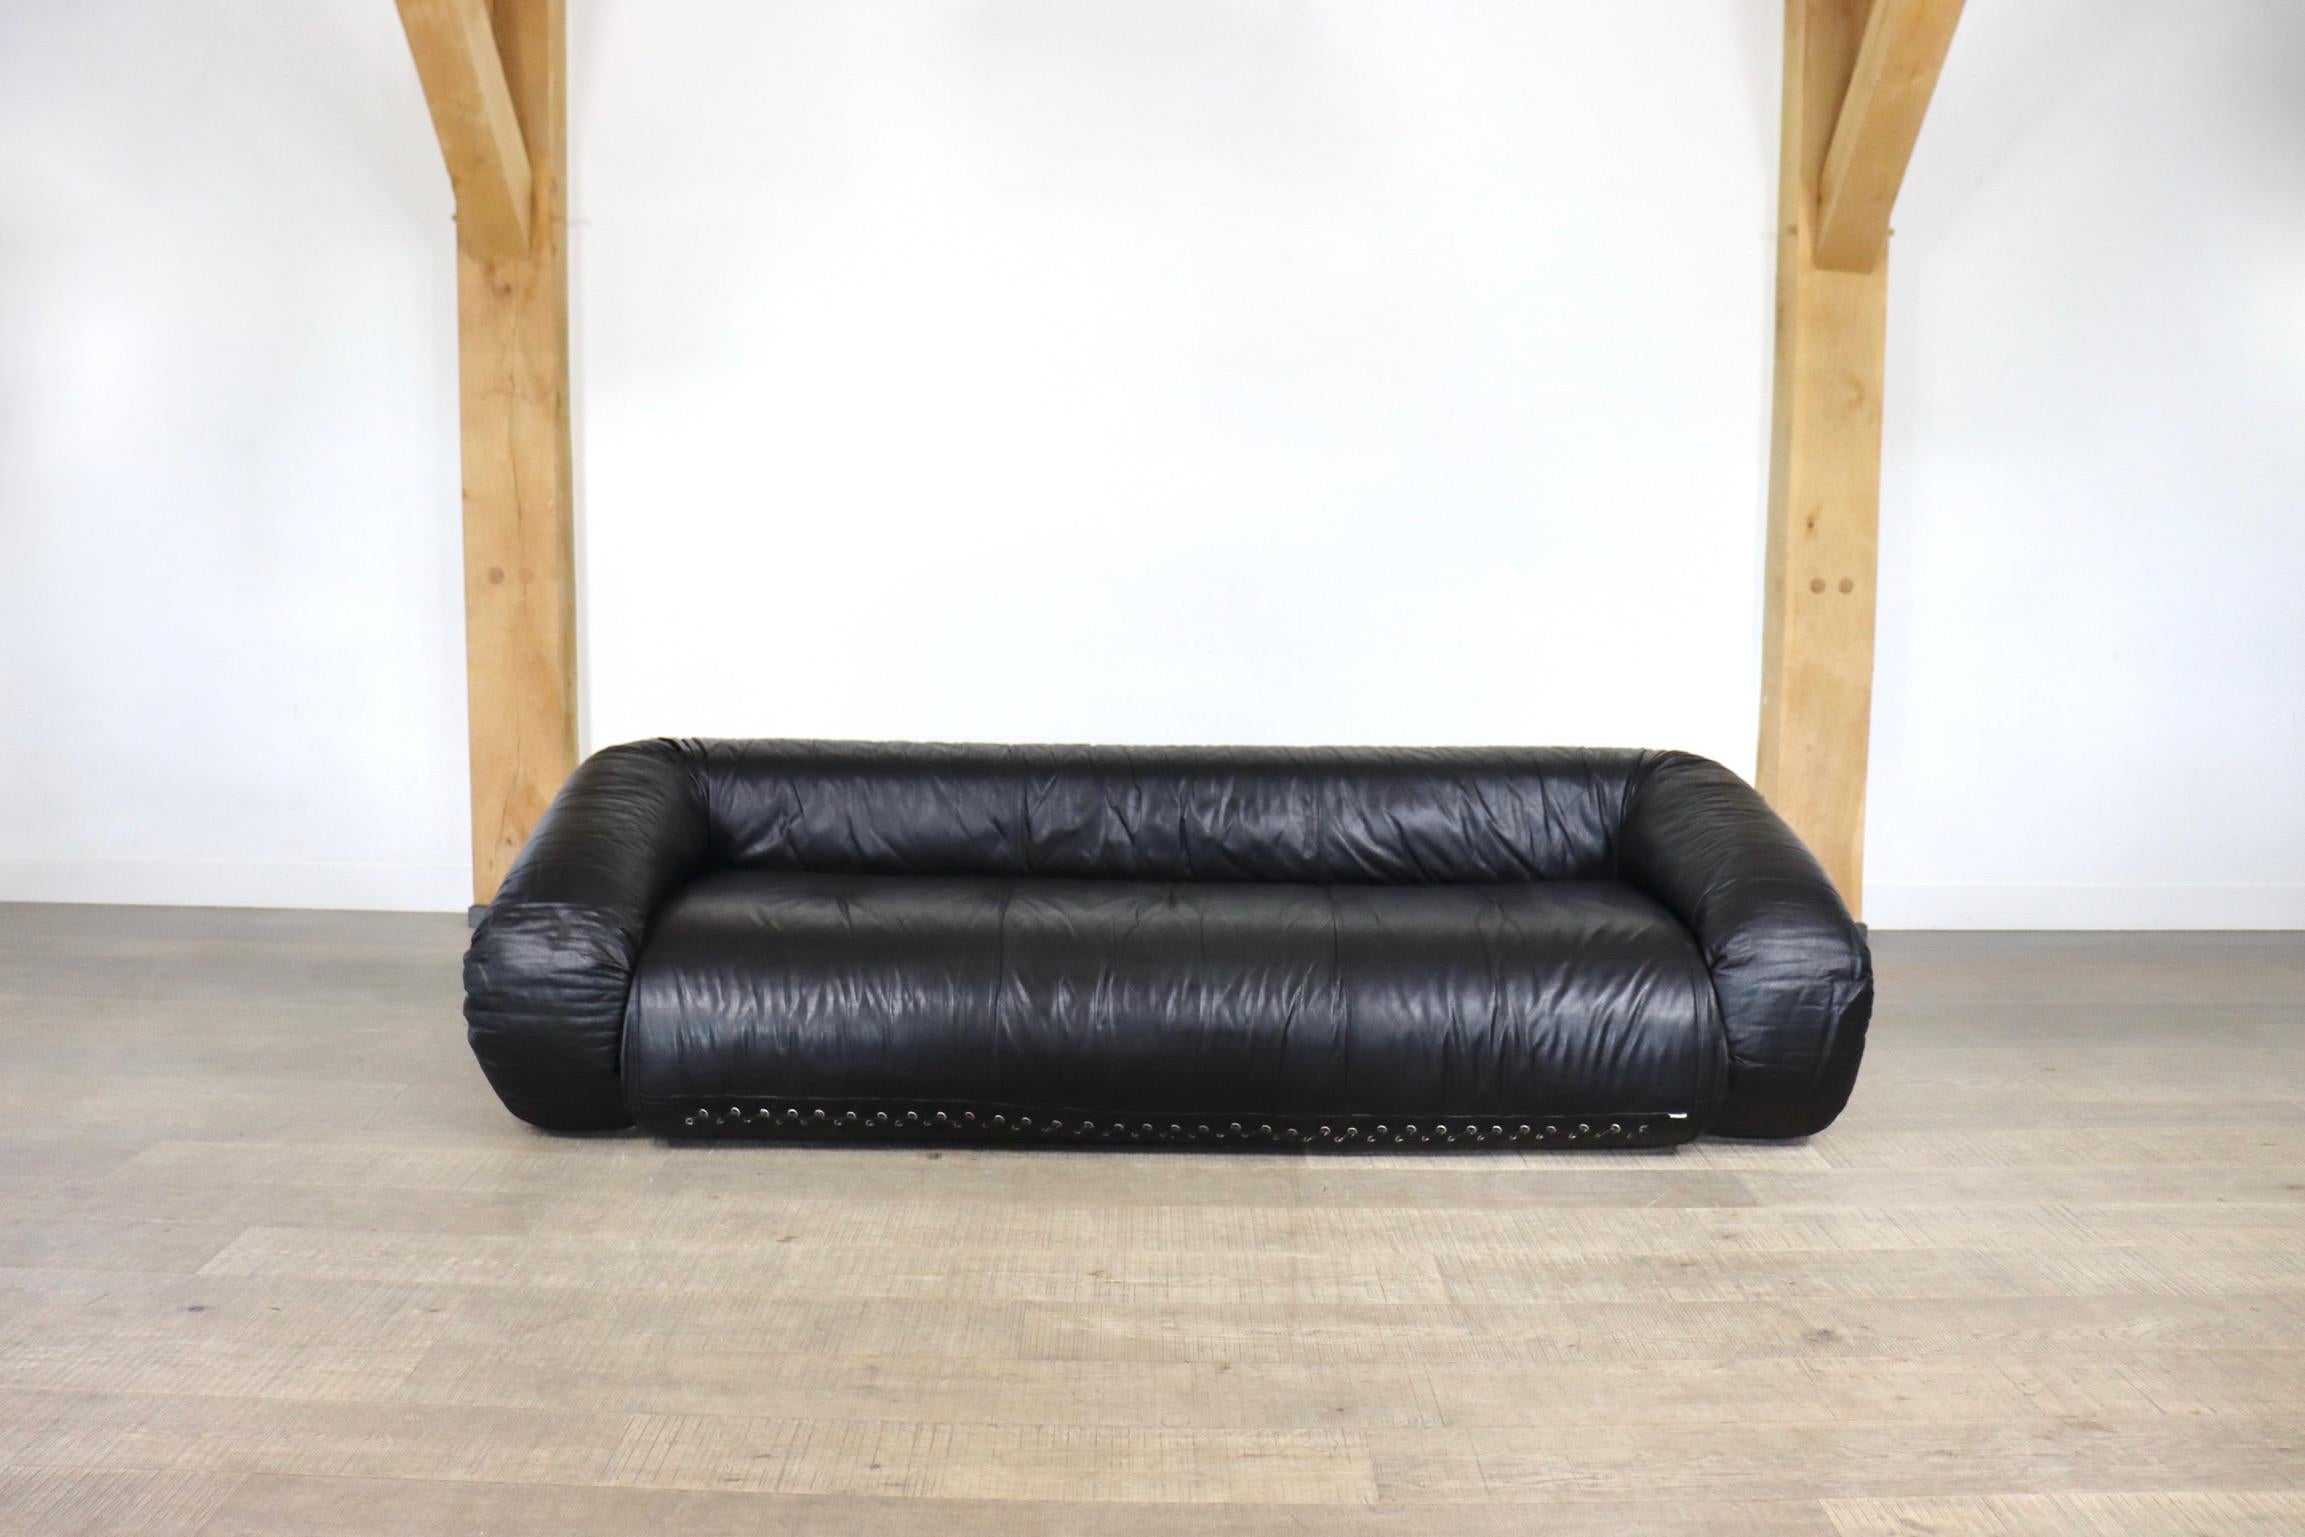 Incredible Anfibio sofa bed by Alessandro Becchi for Giovanetti Collezione Italy 1971. This stunning original black leather upholstery fits perfectly with the white teddy fabric on the mattress inside. The sofa can easily be converted into a bed, or